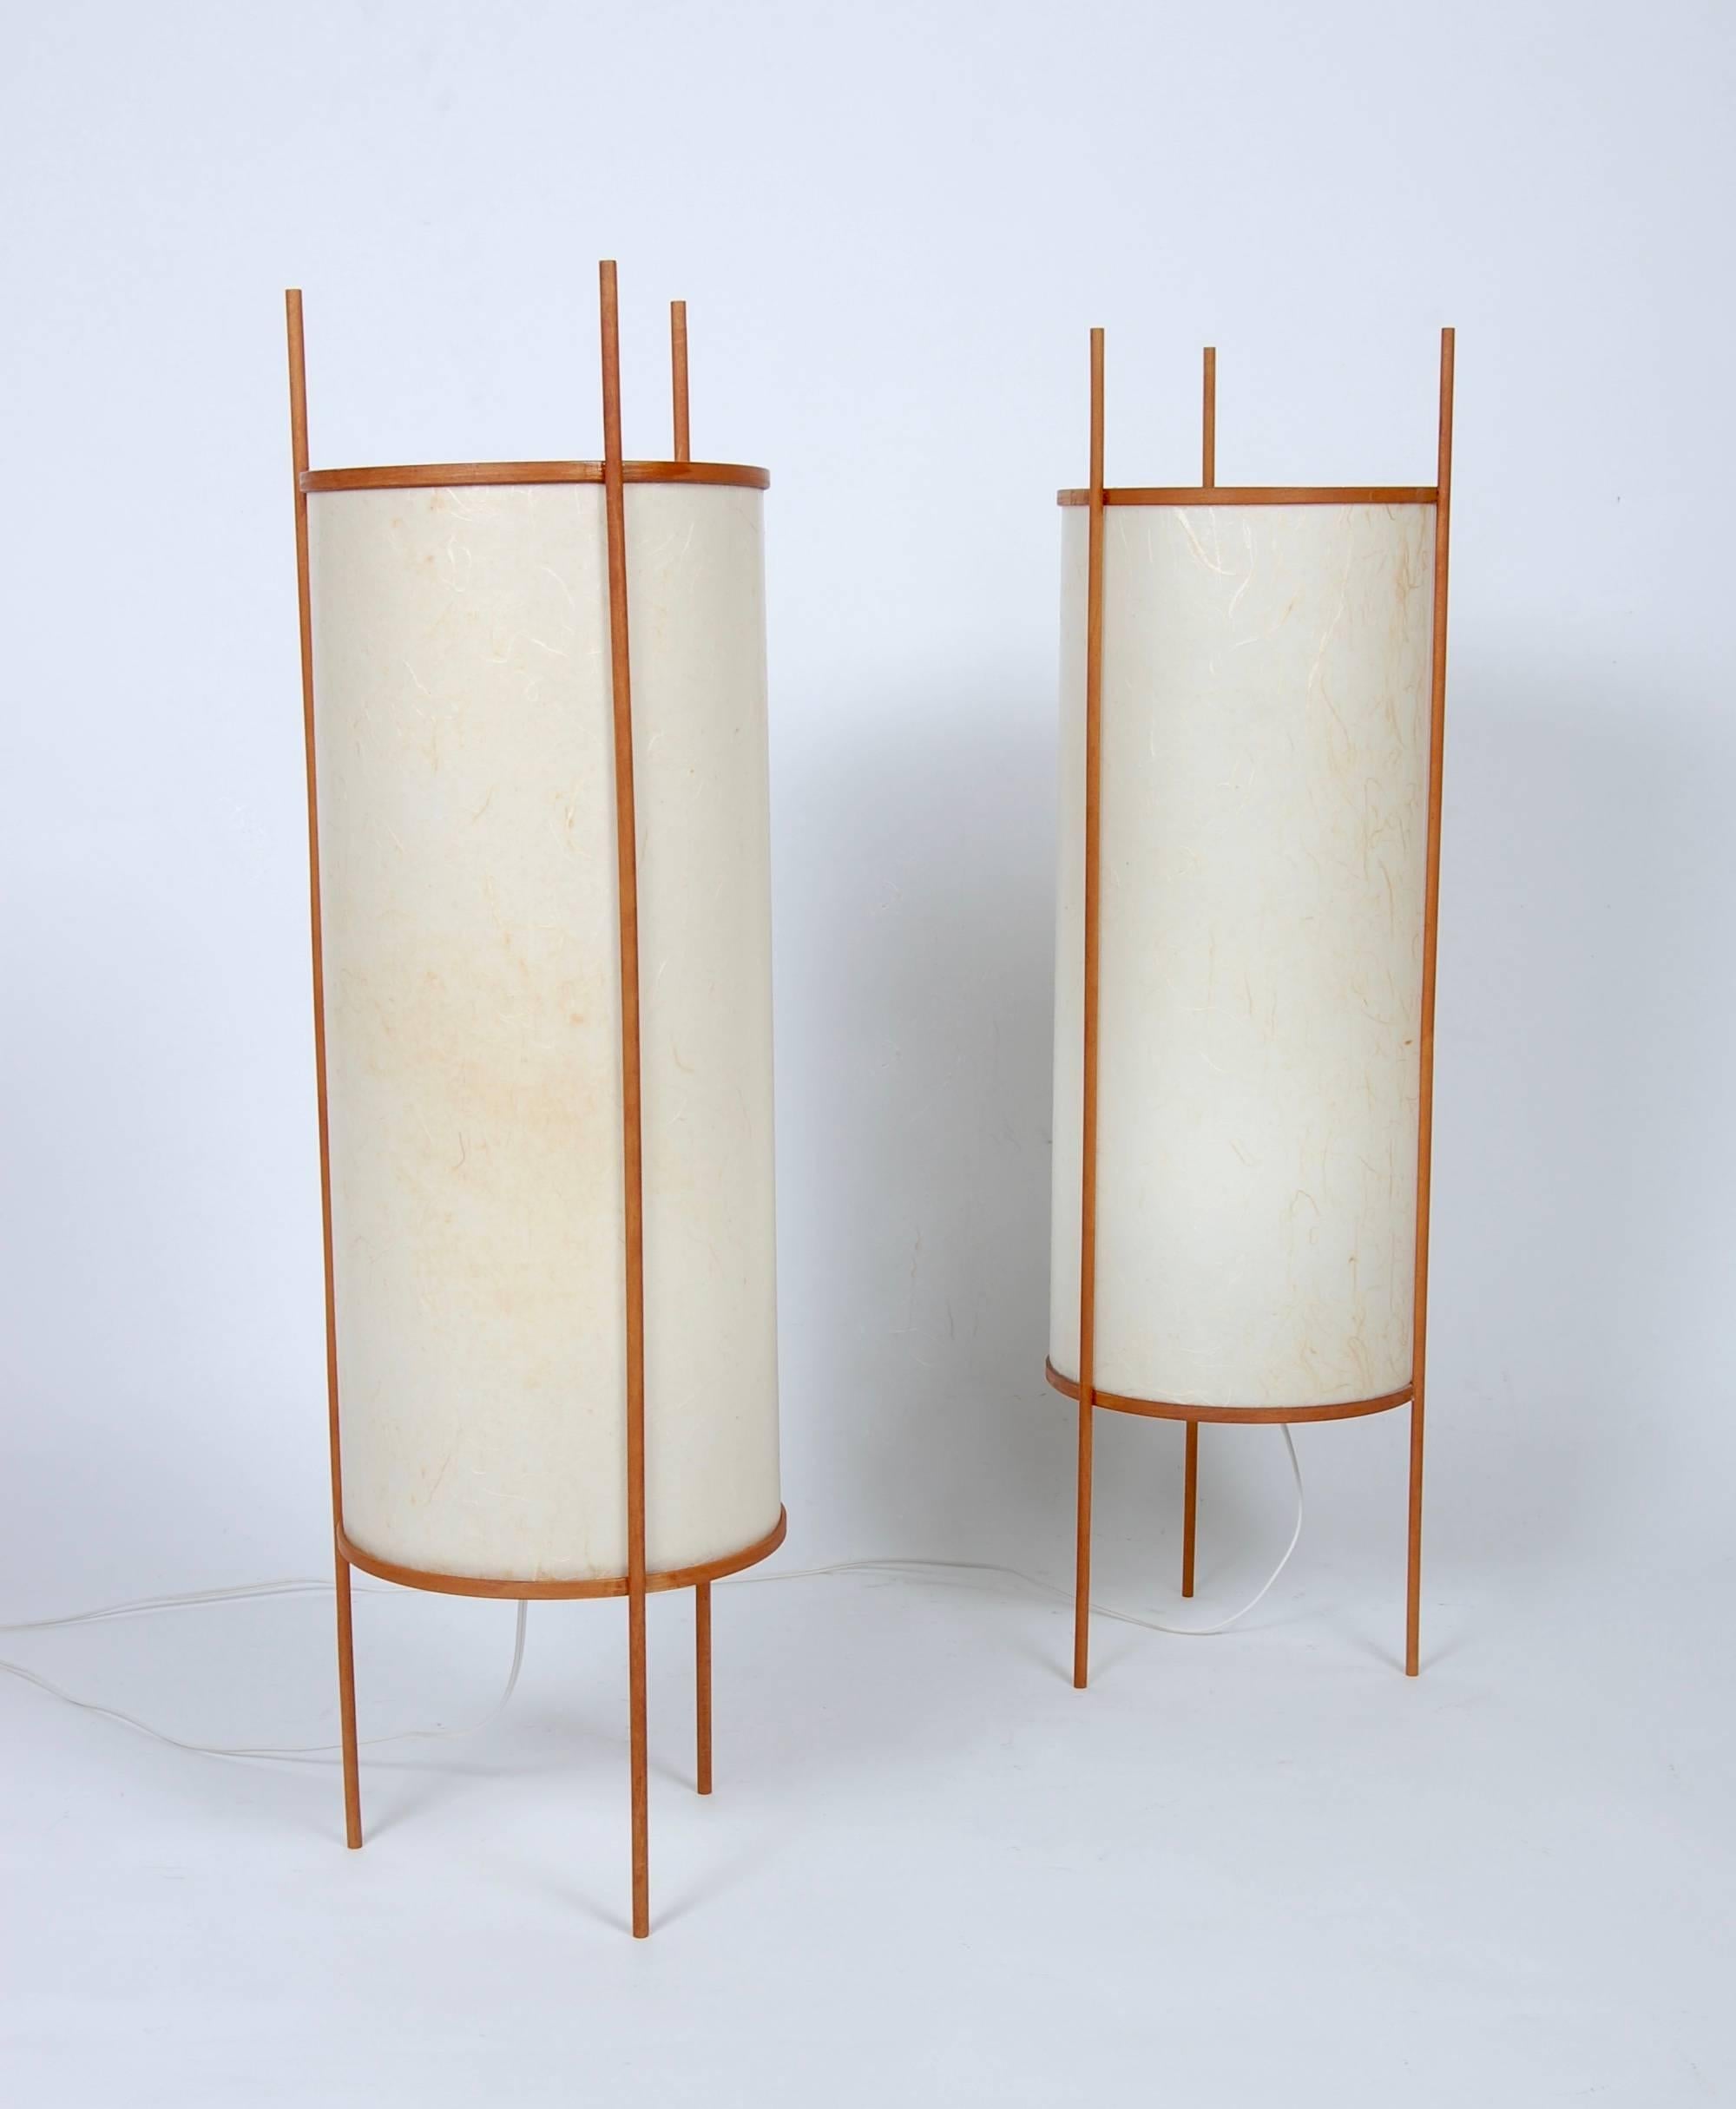 Tall Japanese table or floor lamps wood frames with infused fibers in the fiberglass shades, newly rewired.